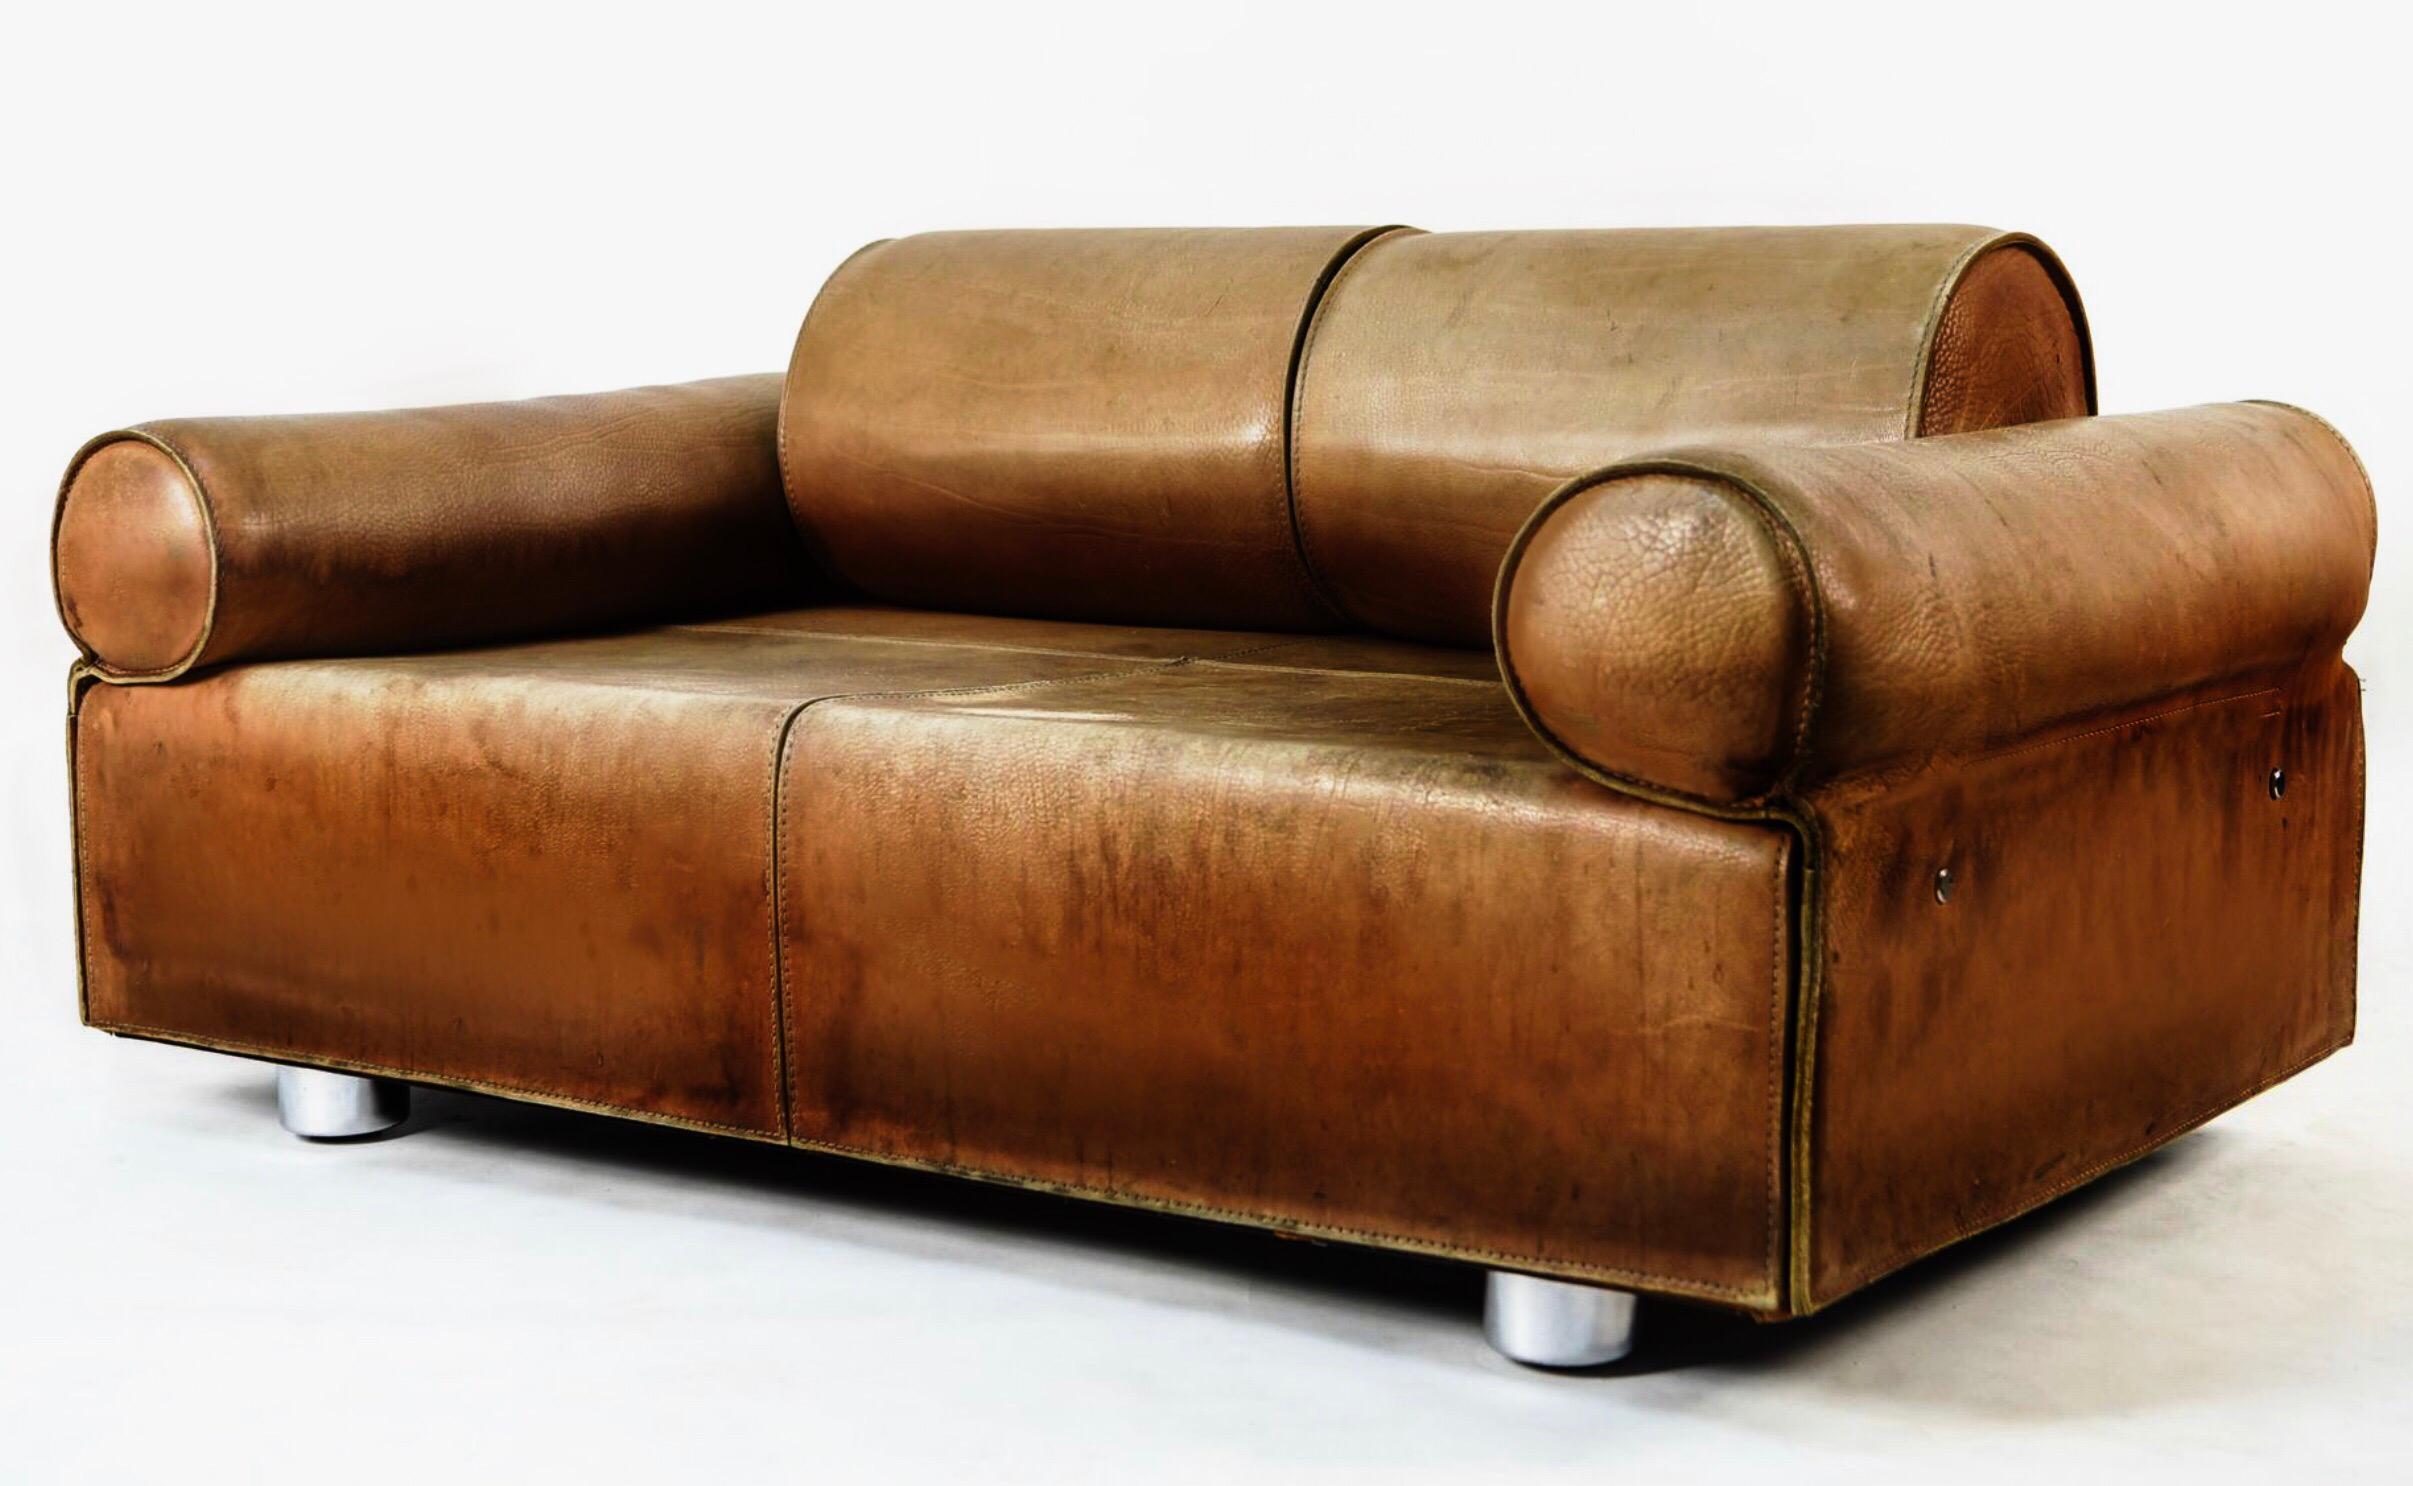 Rare buffalo two-seat sofa / daybed with Independently  adjustable back and arm rests / bolsters. Gorgeous patinated buffalo leather. Original hardware and legs.  by Iconic mid-century Italian designer Marzio Cecchi.   Exceptionally rare piece,